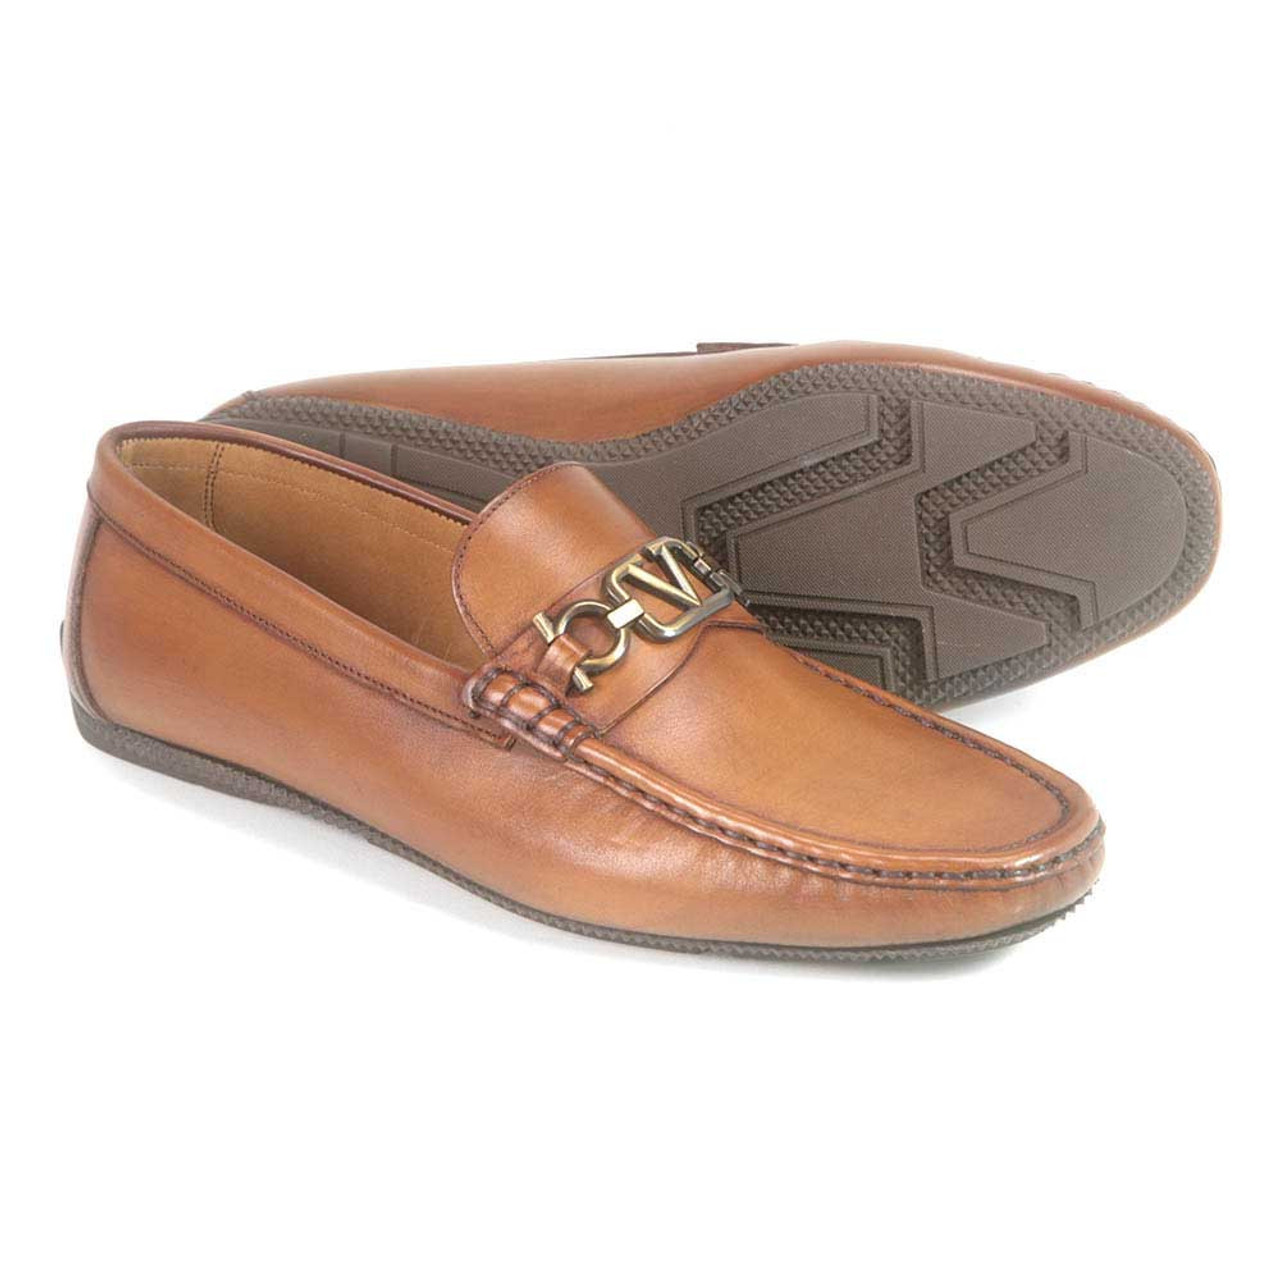 Men's size 11 1/2 Louis Vuitton moccasin loafers  Louis vuitton loafers,  Mens casual leather shoes, Italian shoes for men